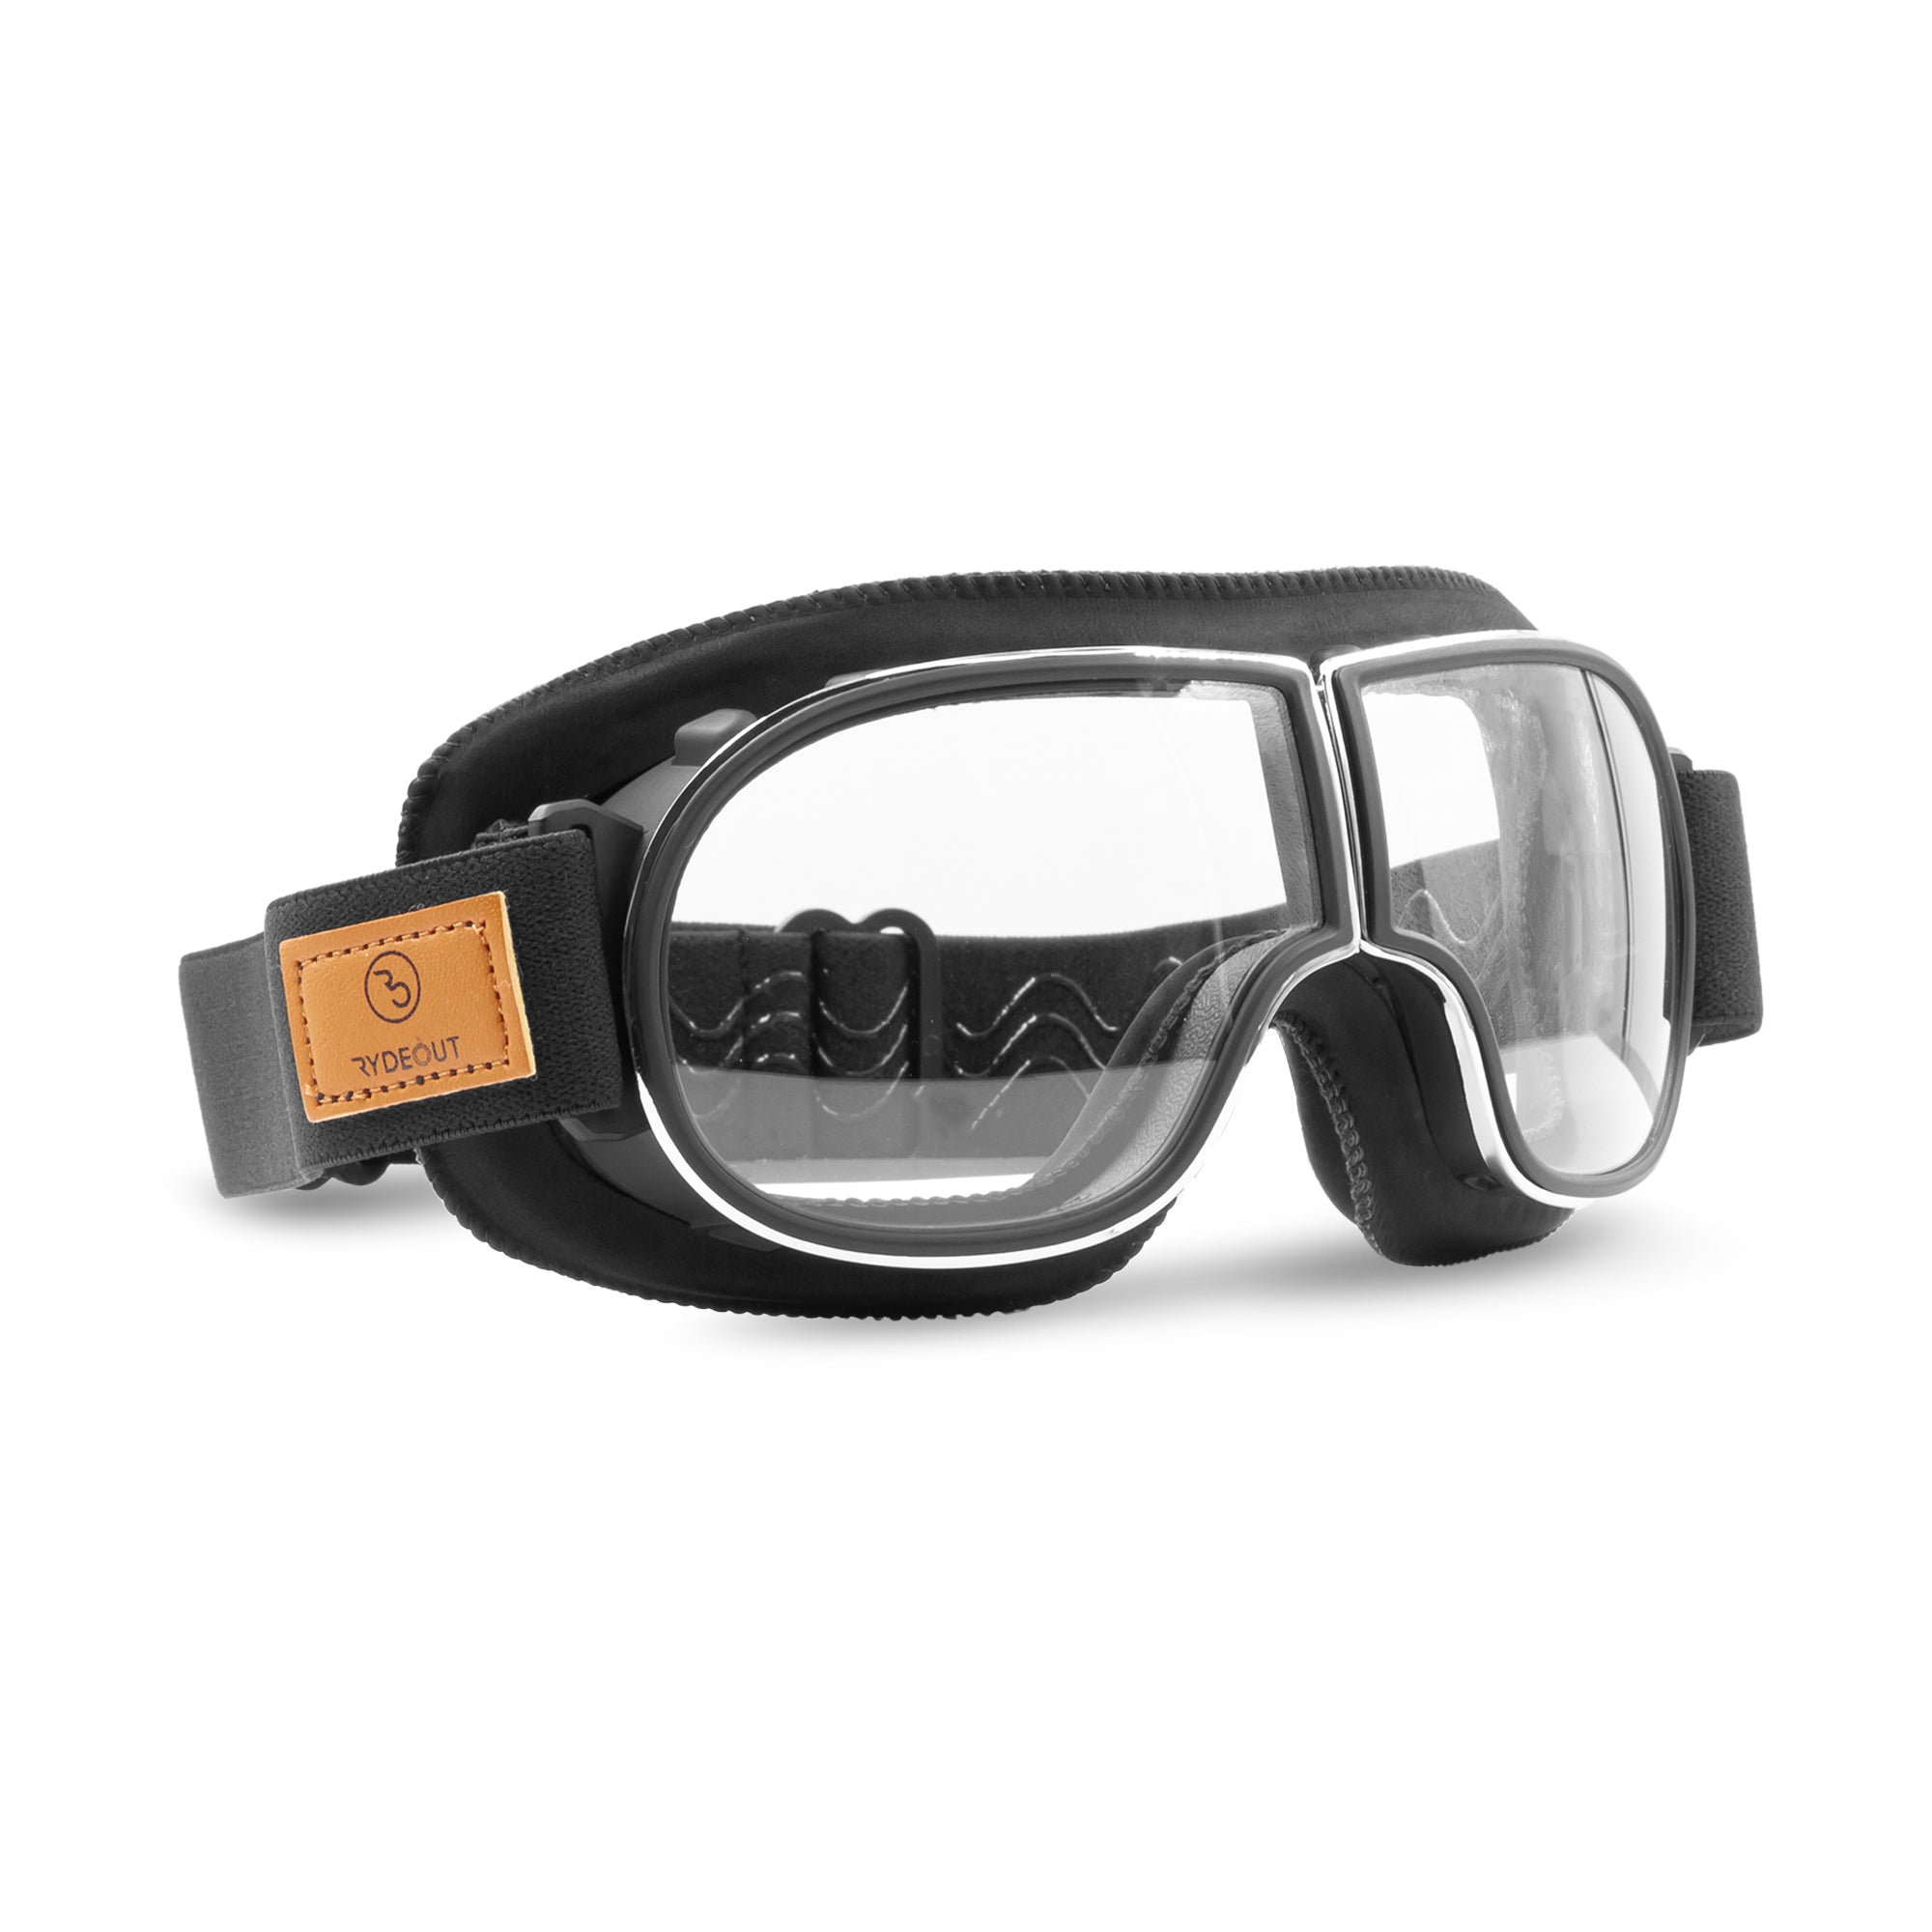 Rydeout Retro 305 Goggles – Clear Lens